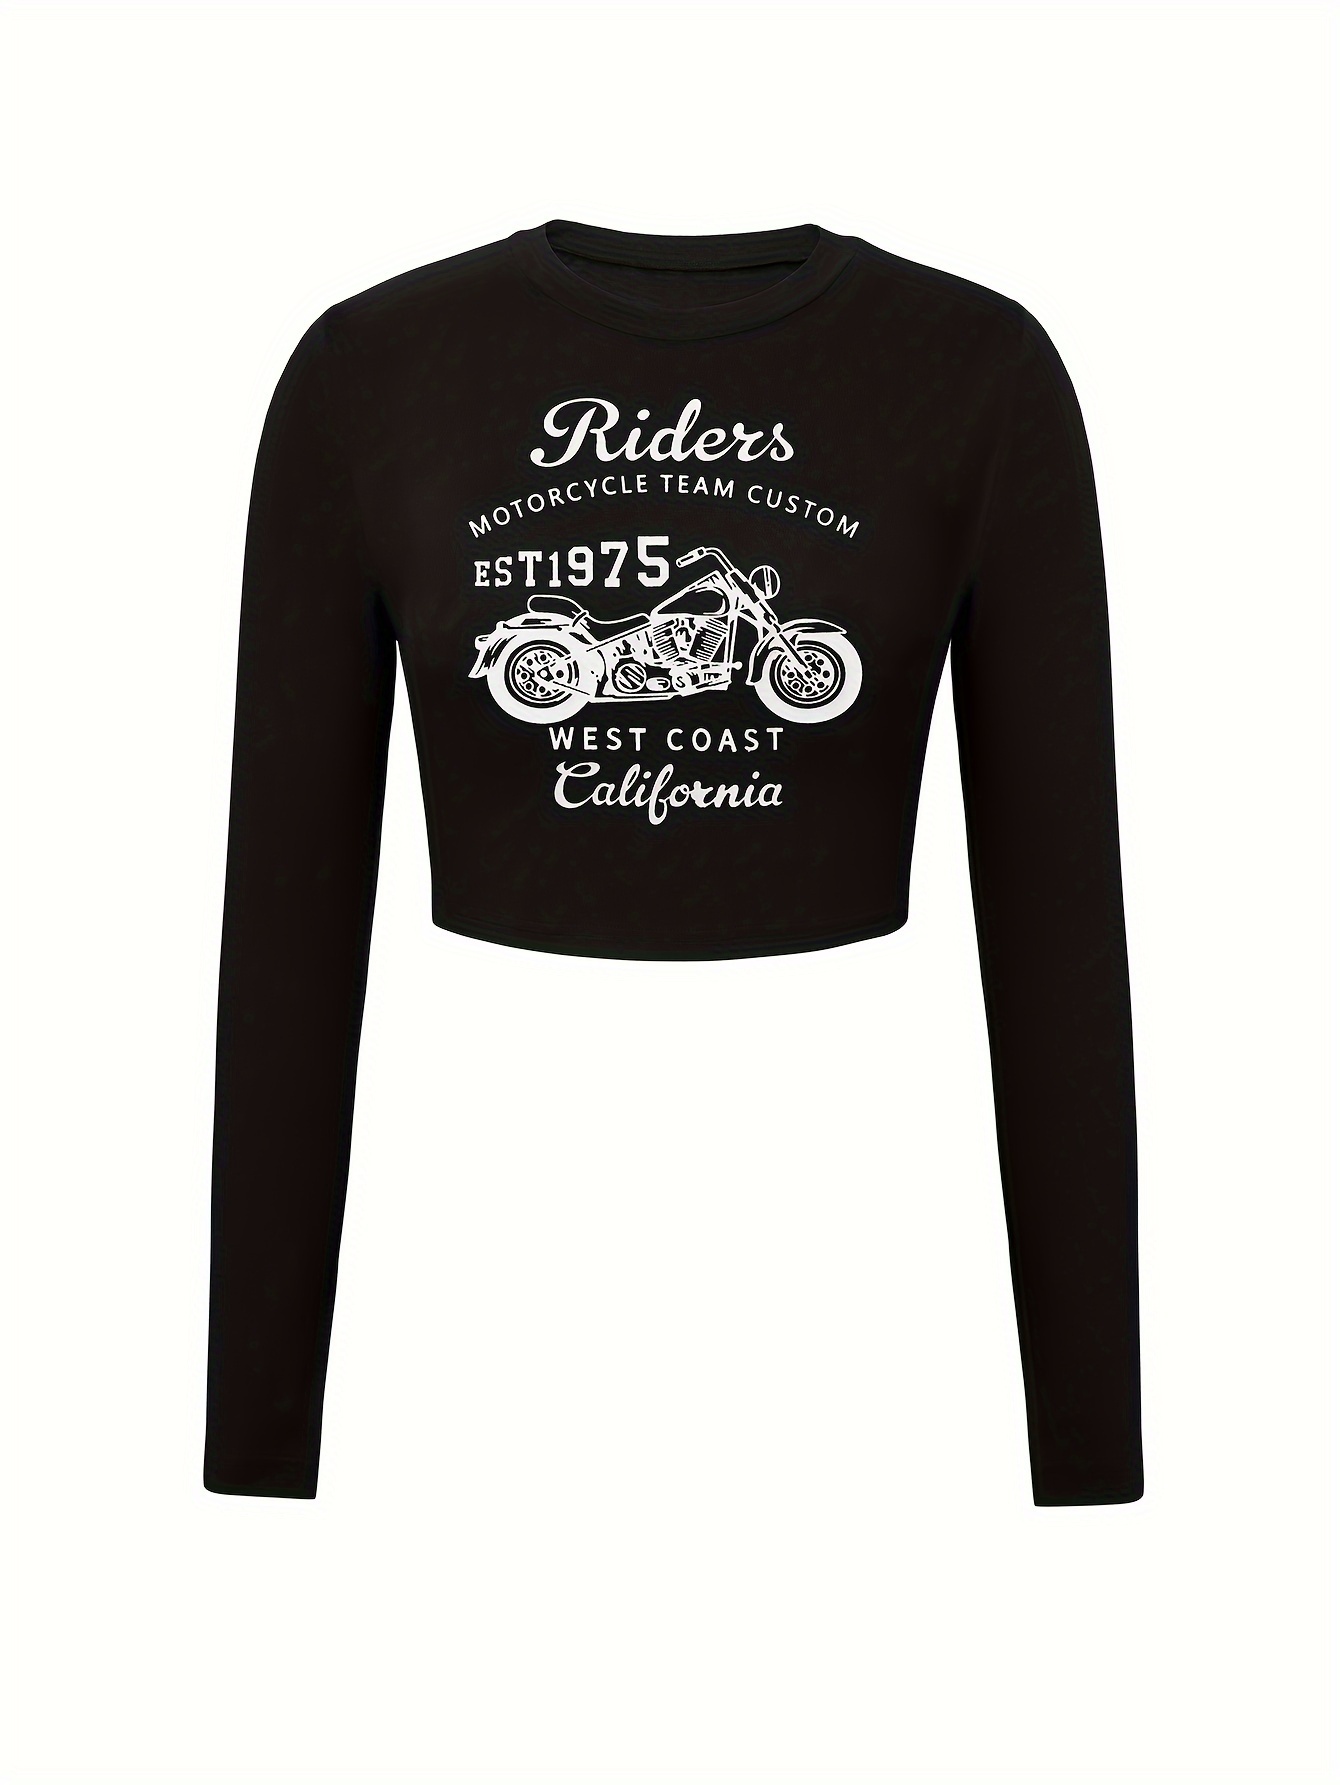 Moto Crew Long Sleeve T-Shirt — OVER AND OUT